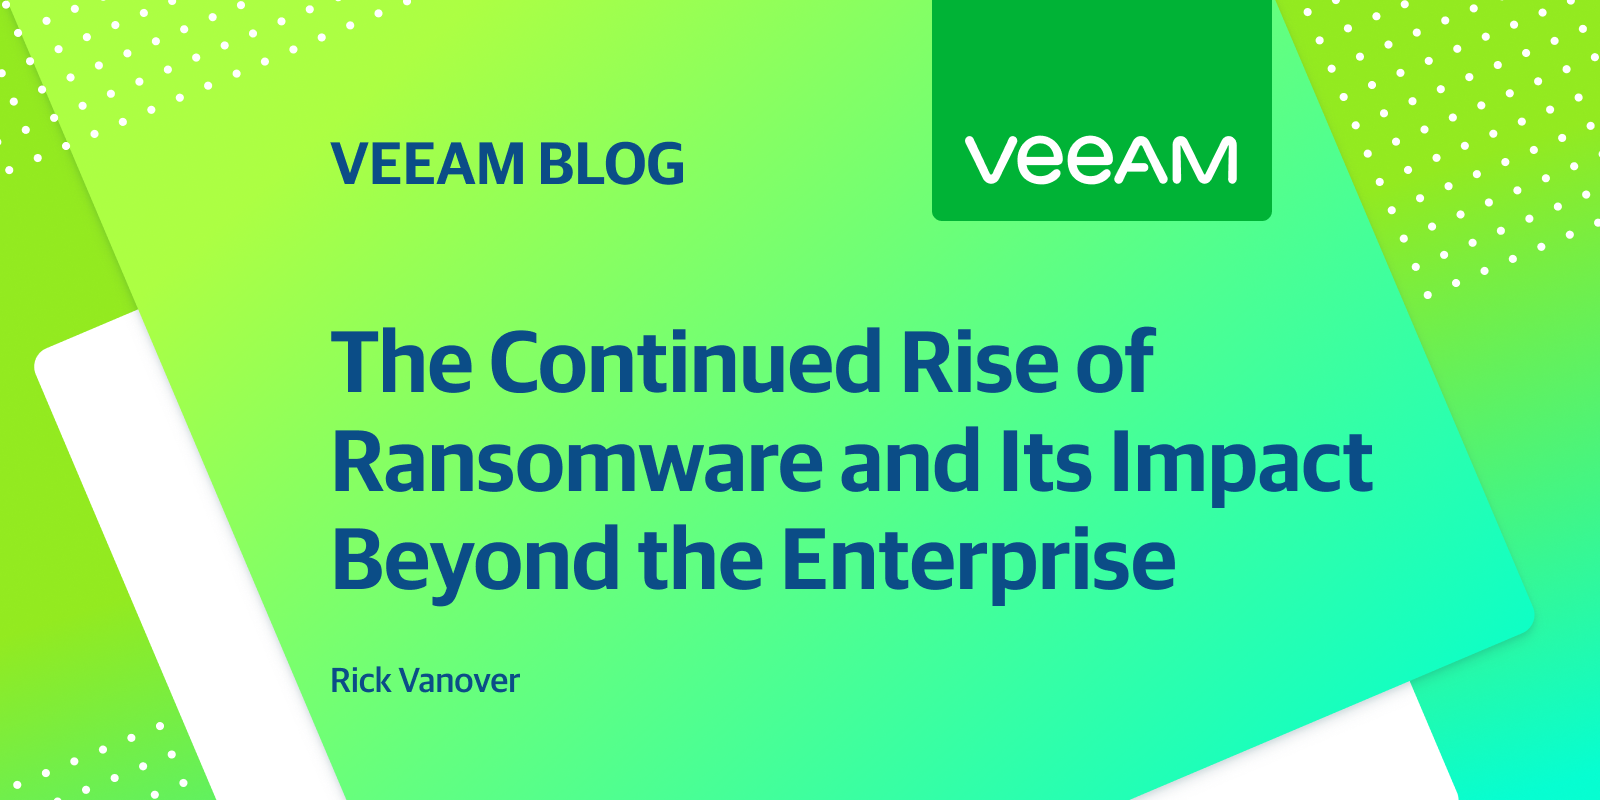 The continued increase of ransomware and its own impact beyond the enterprise